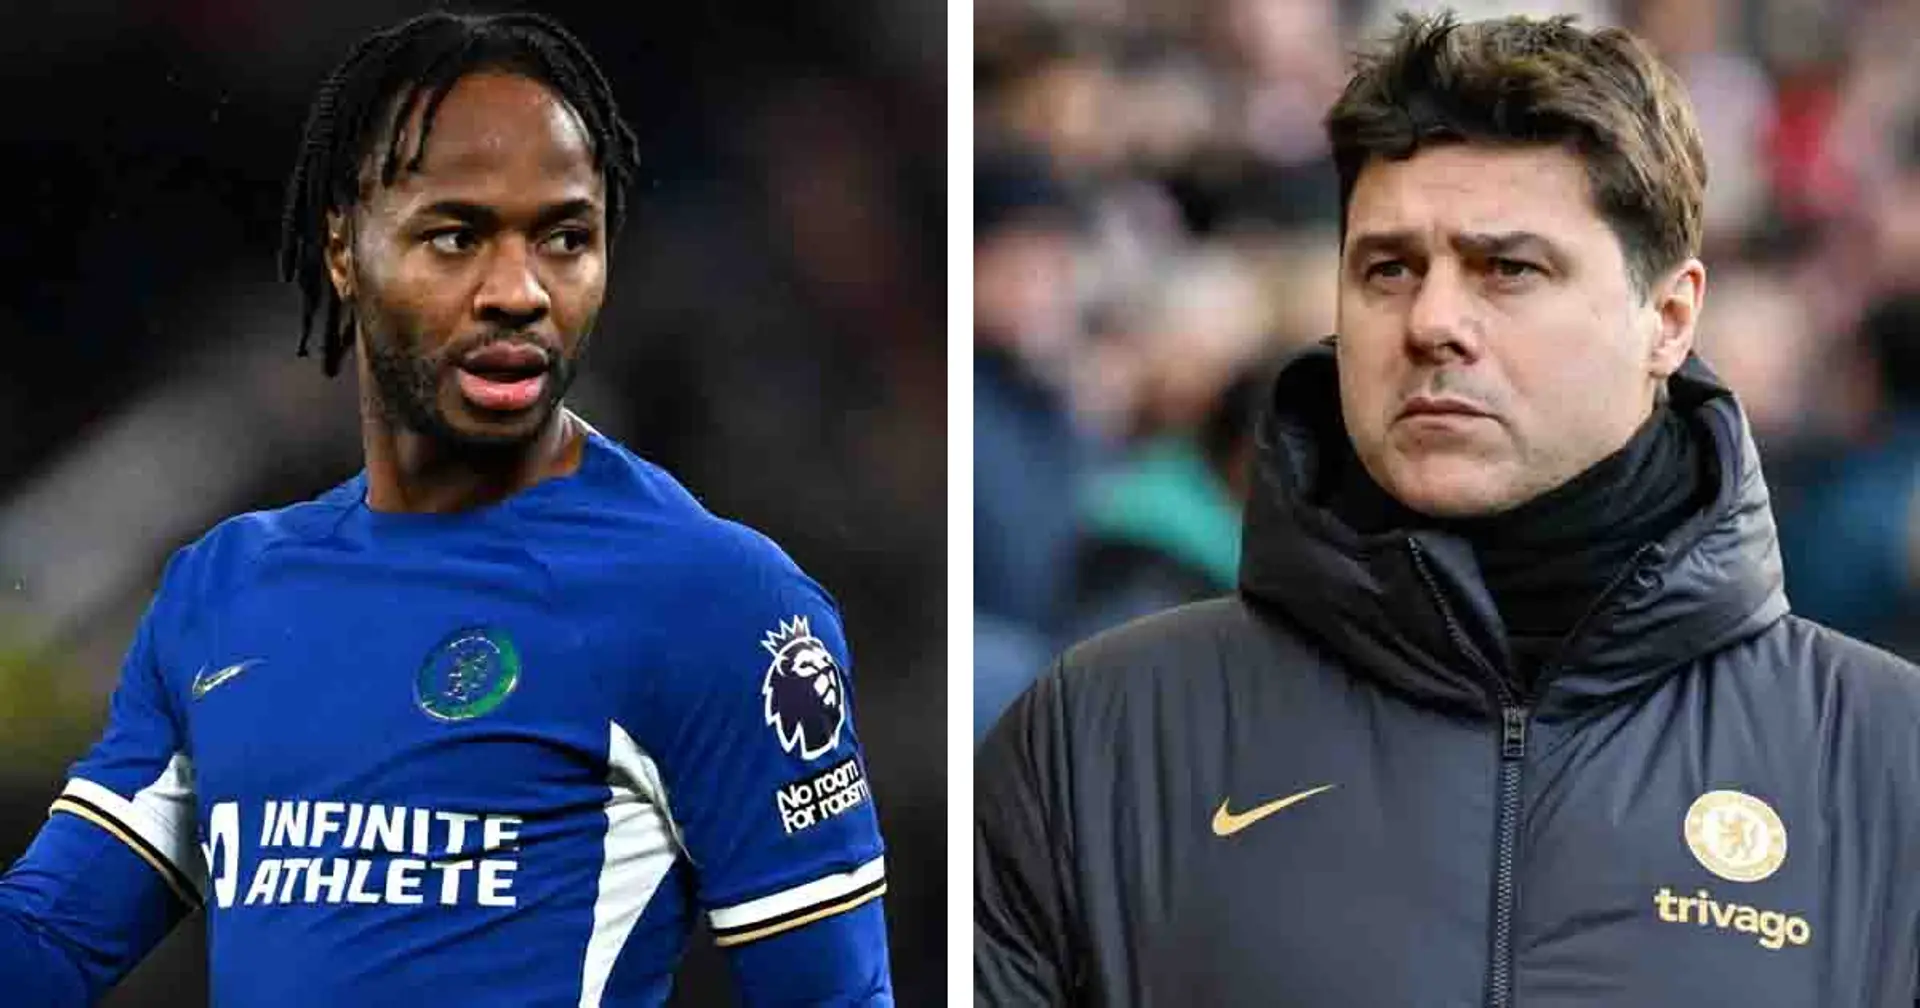 Could Sterling be tempted to possible Saudi Arabia move this summer? Answered